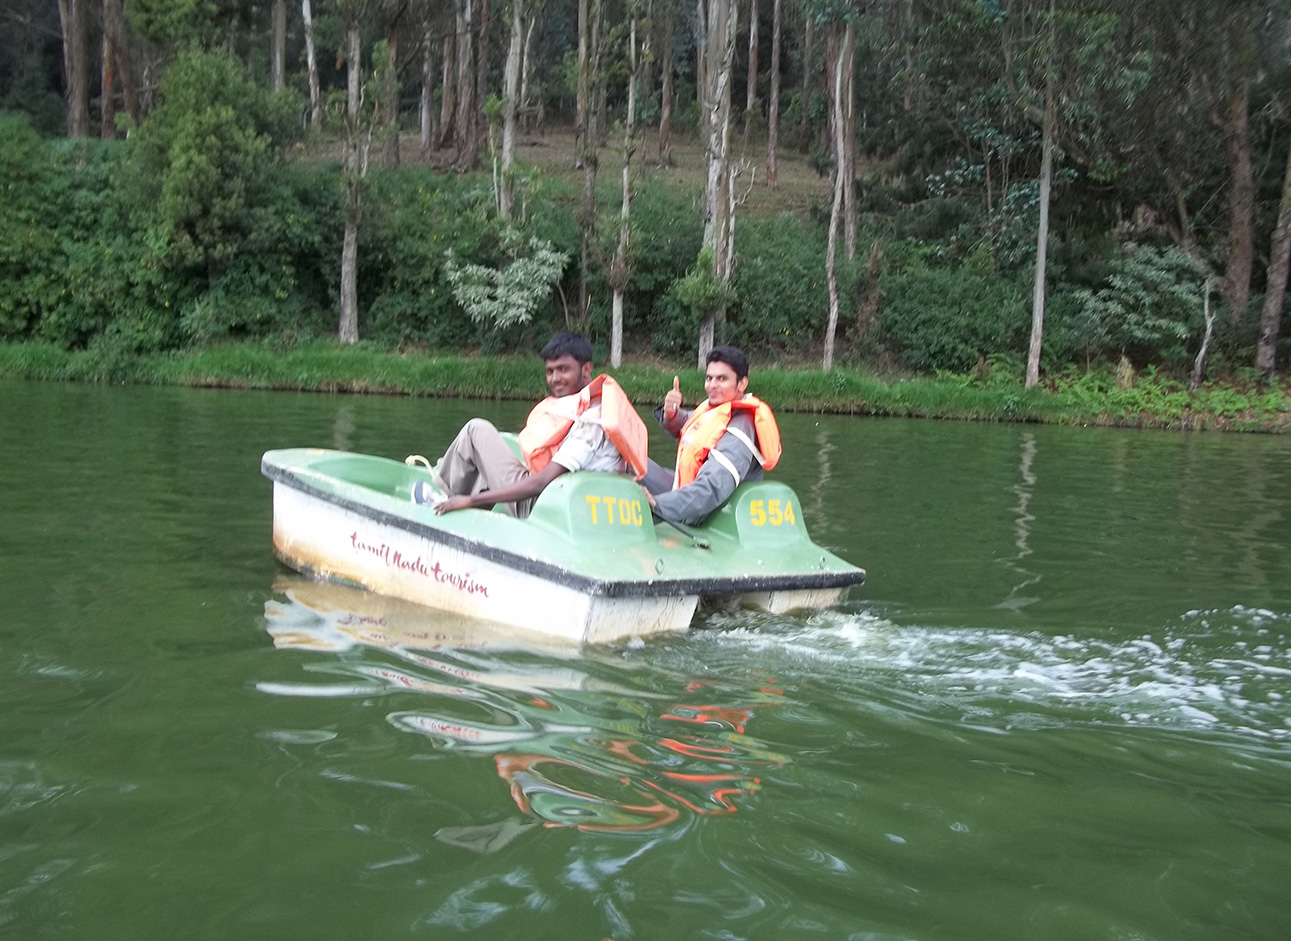 Pedal Boats - Enjoy leisurely rides on pedal boats in serene waters